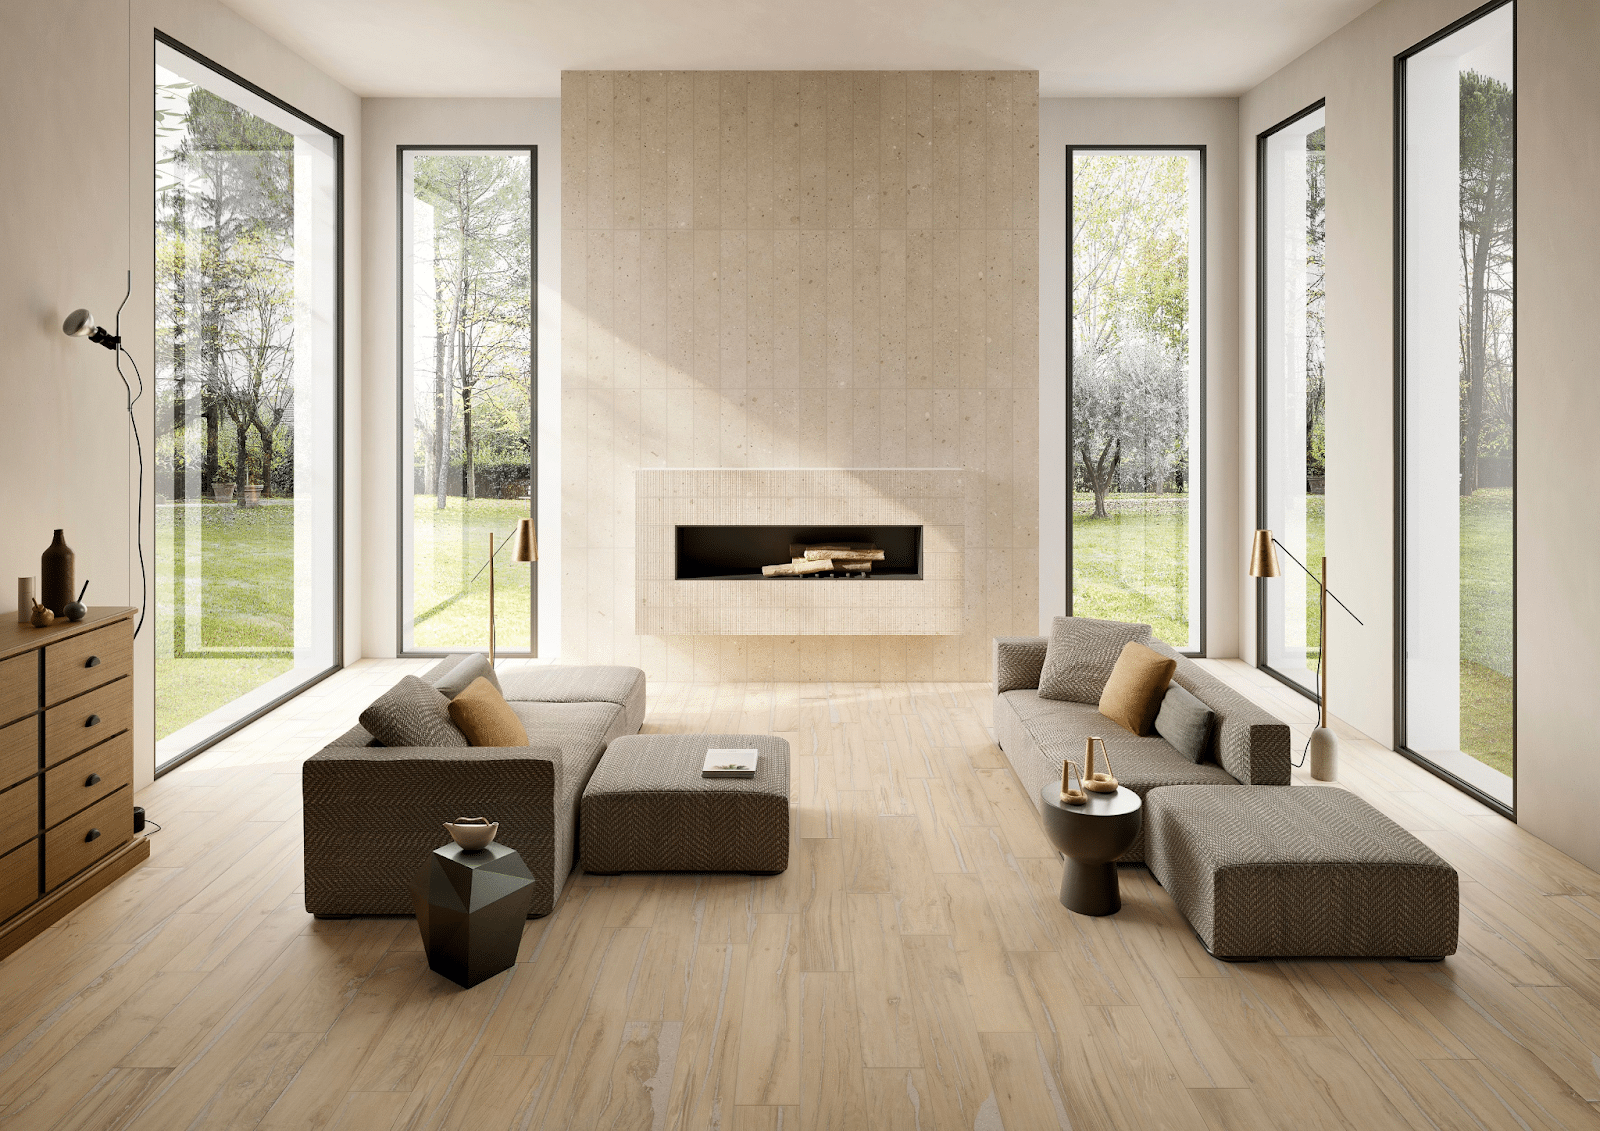 Living room with wood-look tile flooring and stone-look fireplace surround